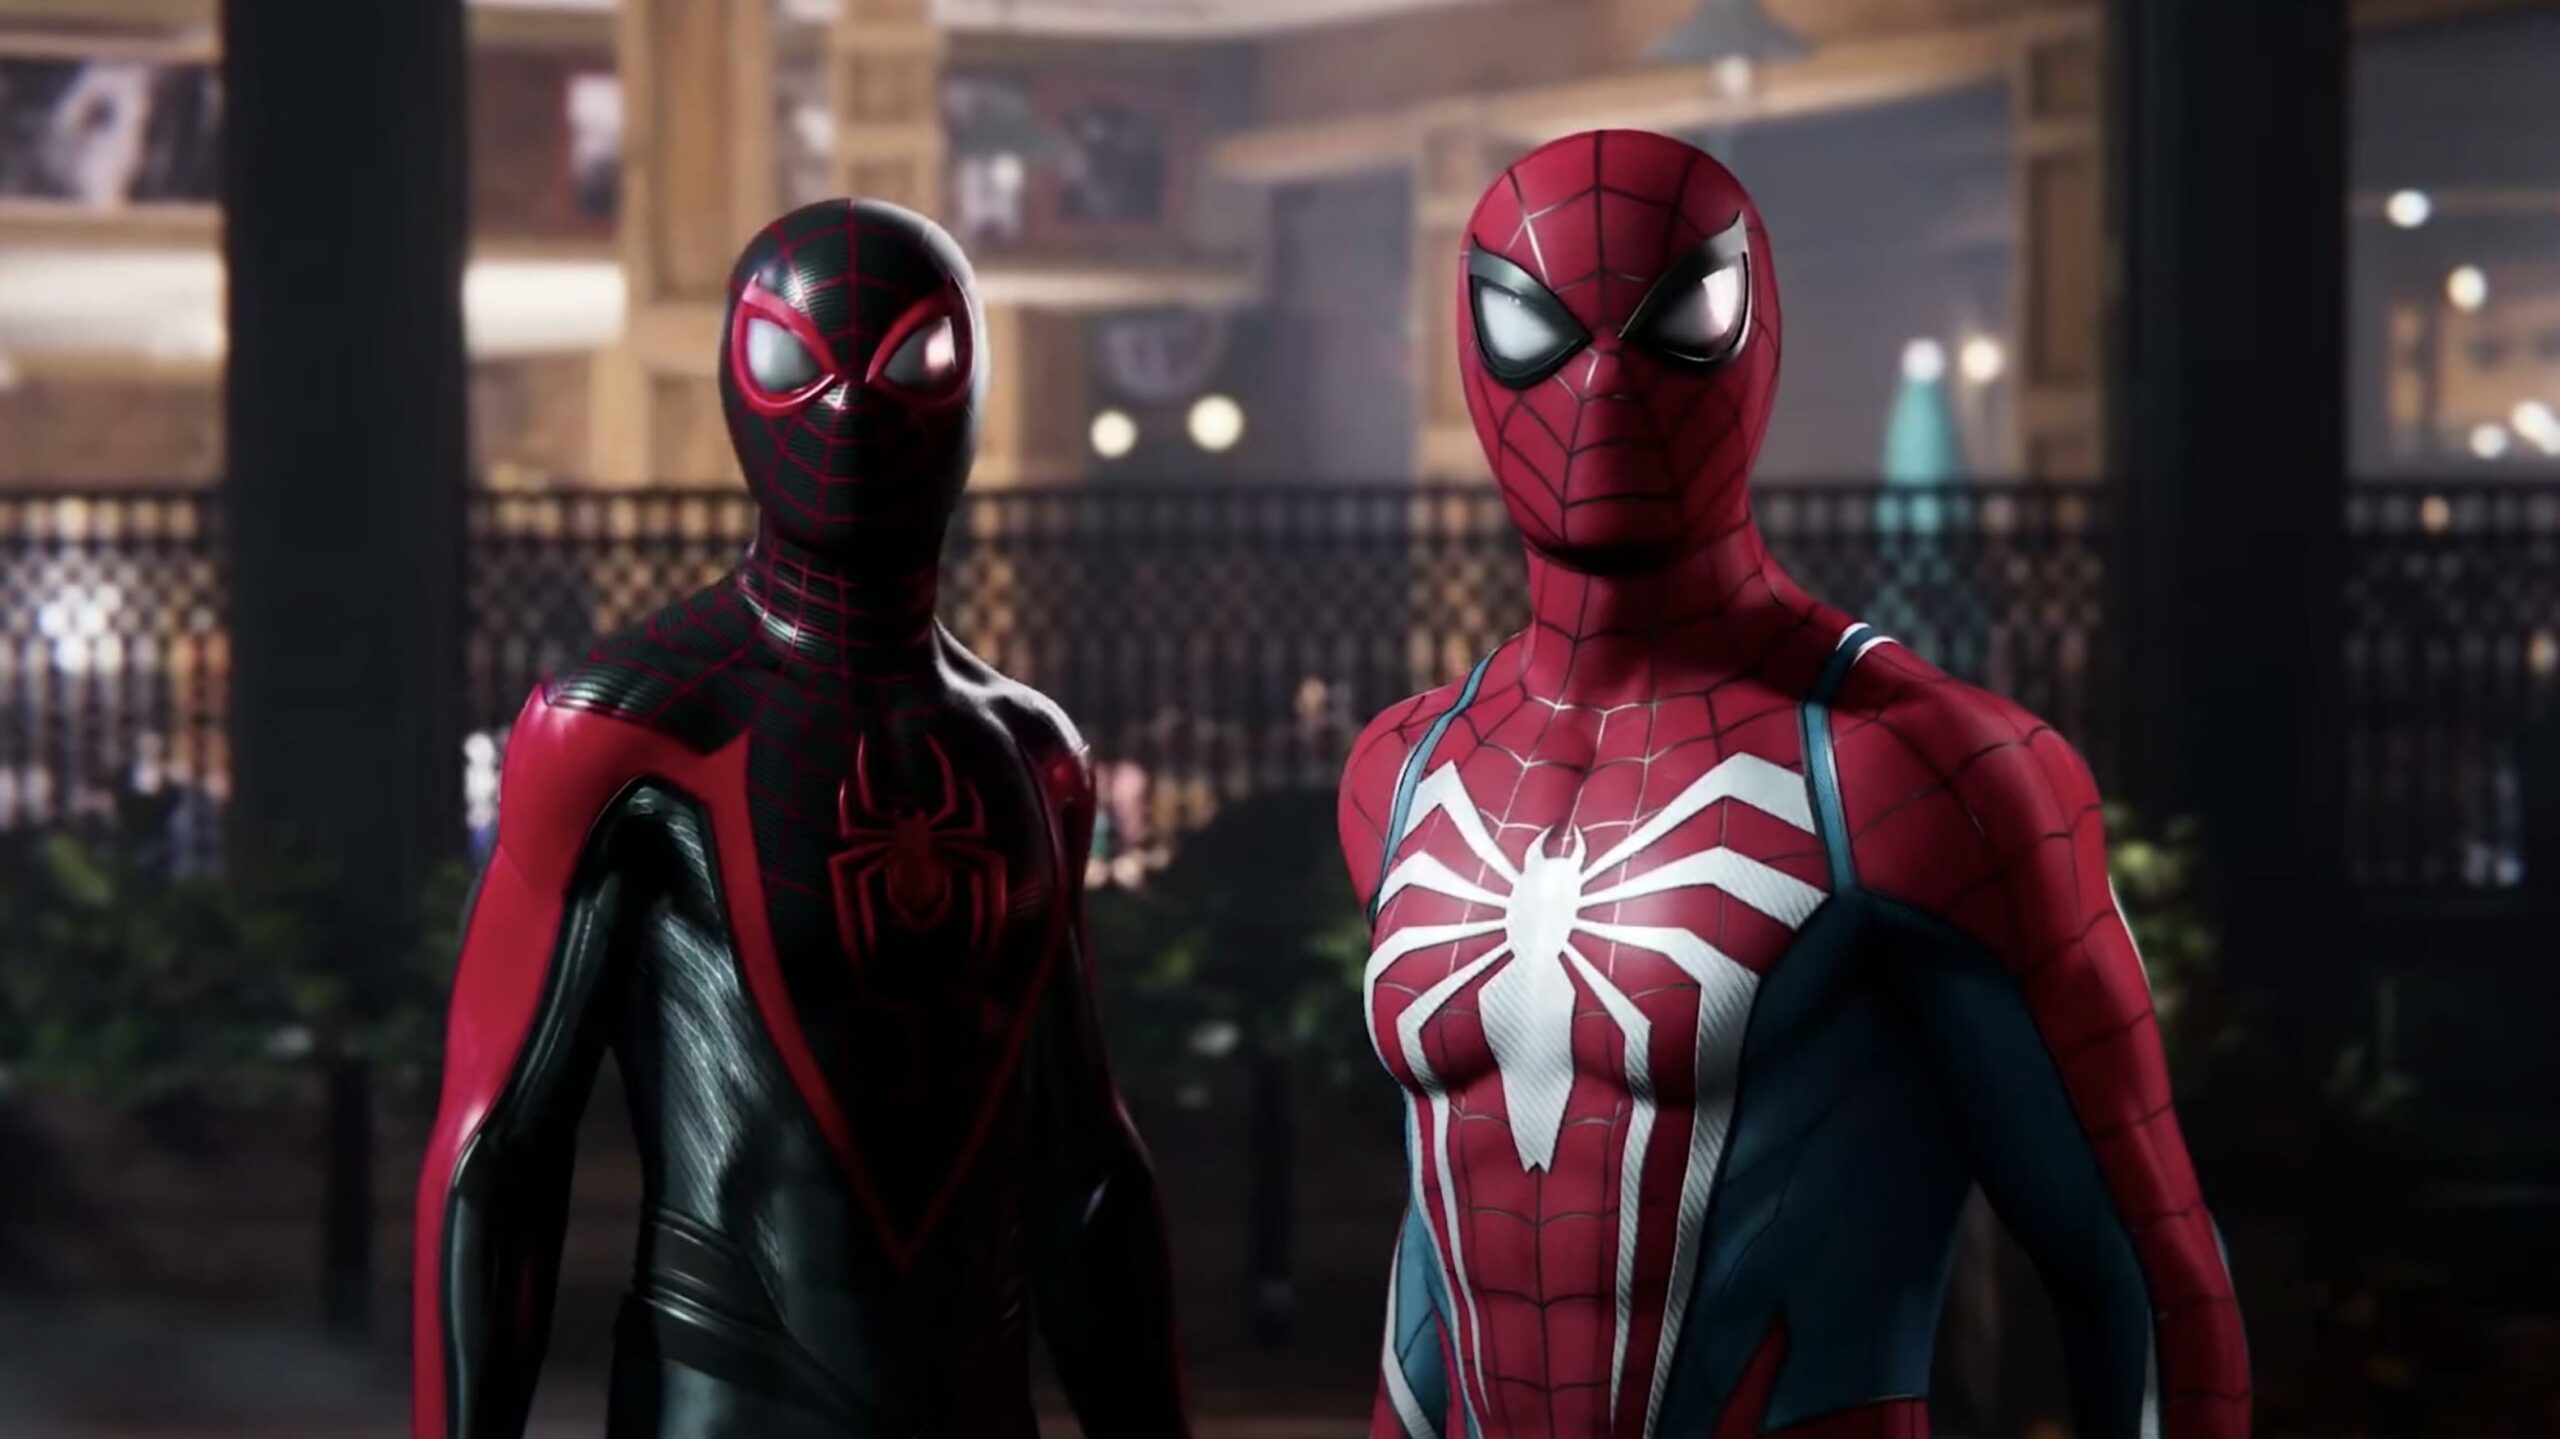  Insomniac Games worked on multiplayer modes for Marvel's Spider-Man, PC files suggest 